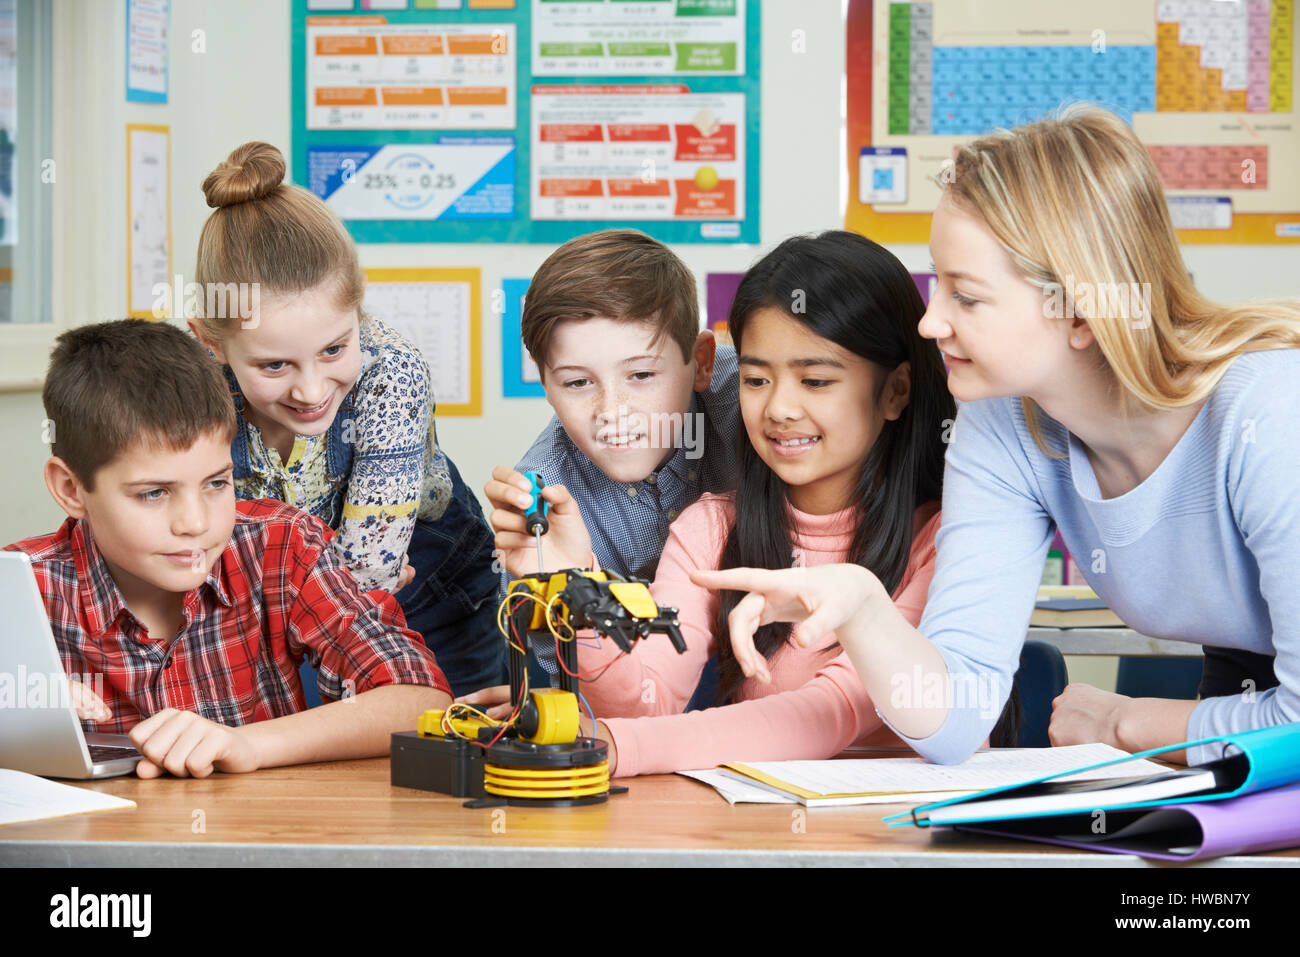 Pupils And Teacher In Science Lesson Studying Robotics Stock Photo